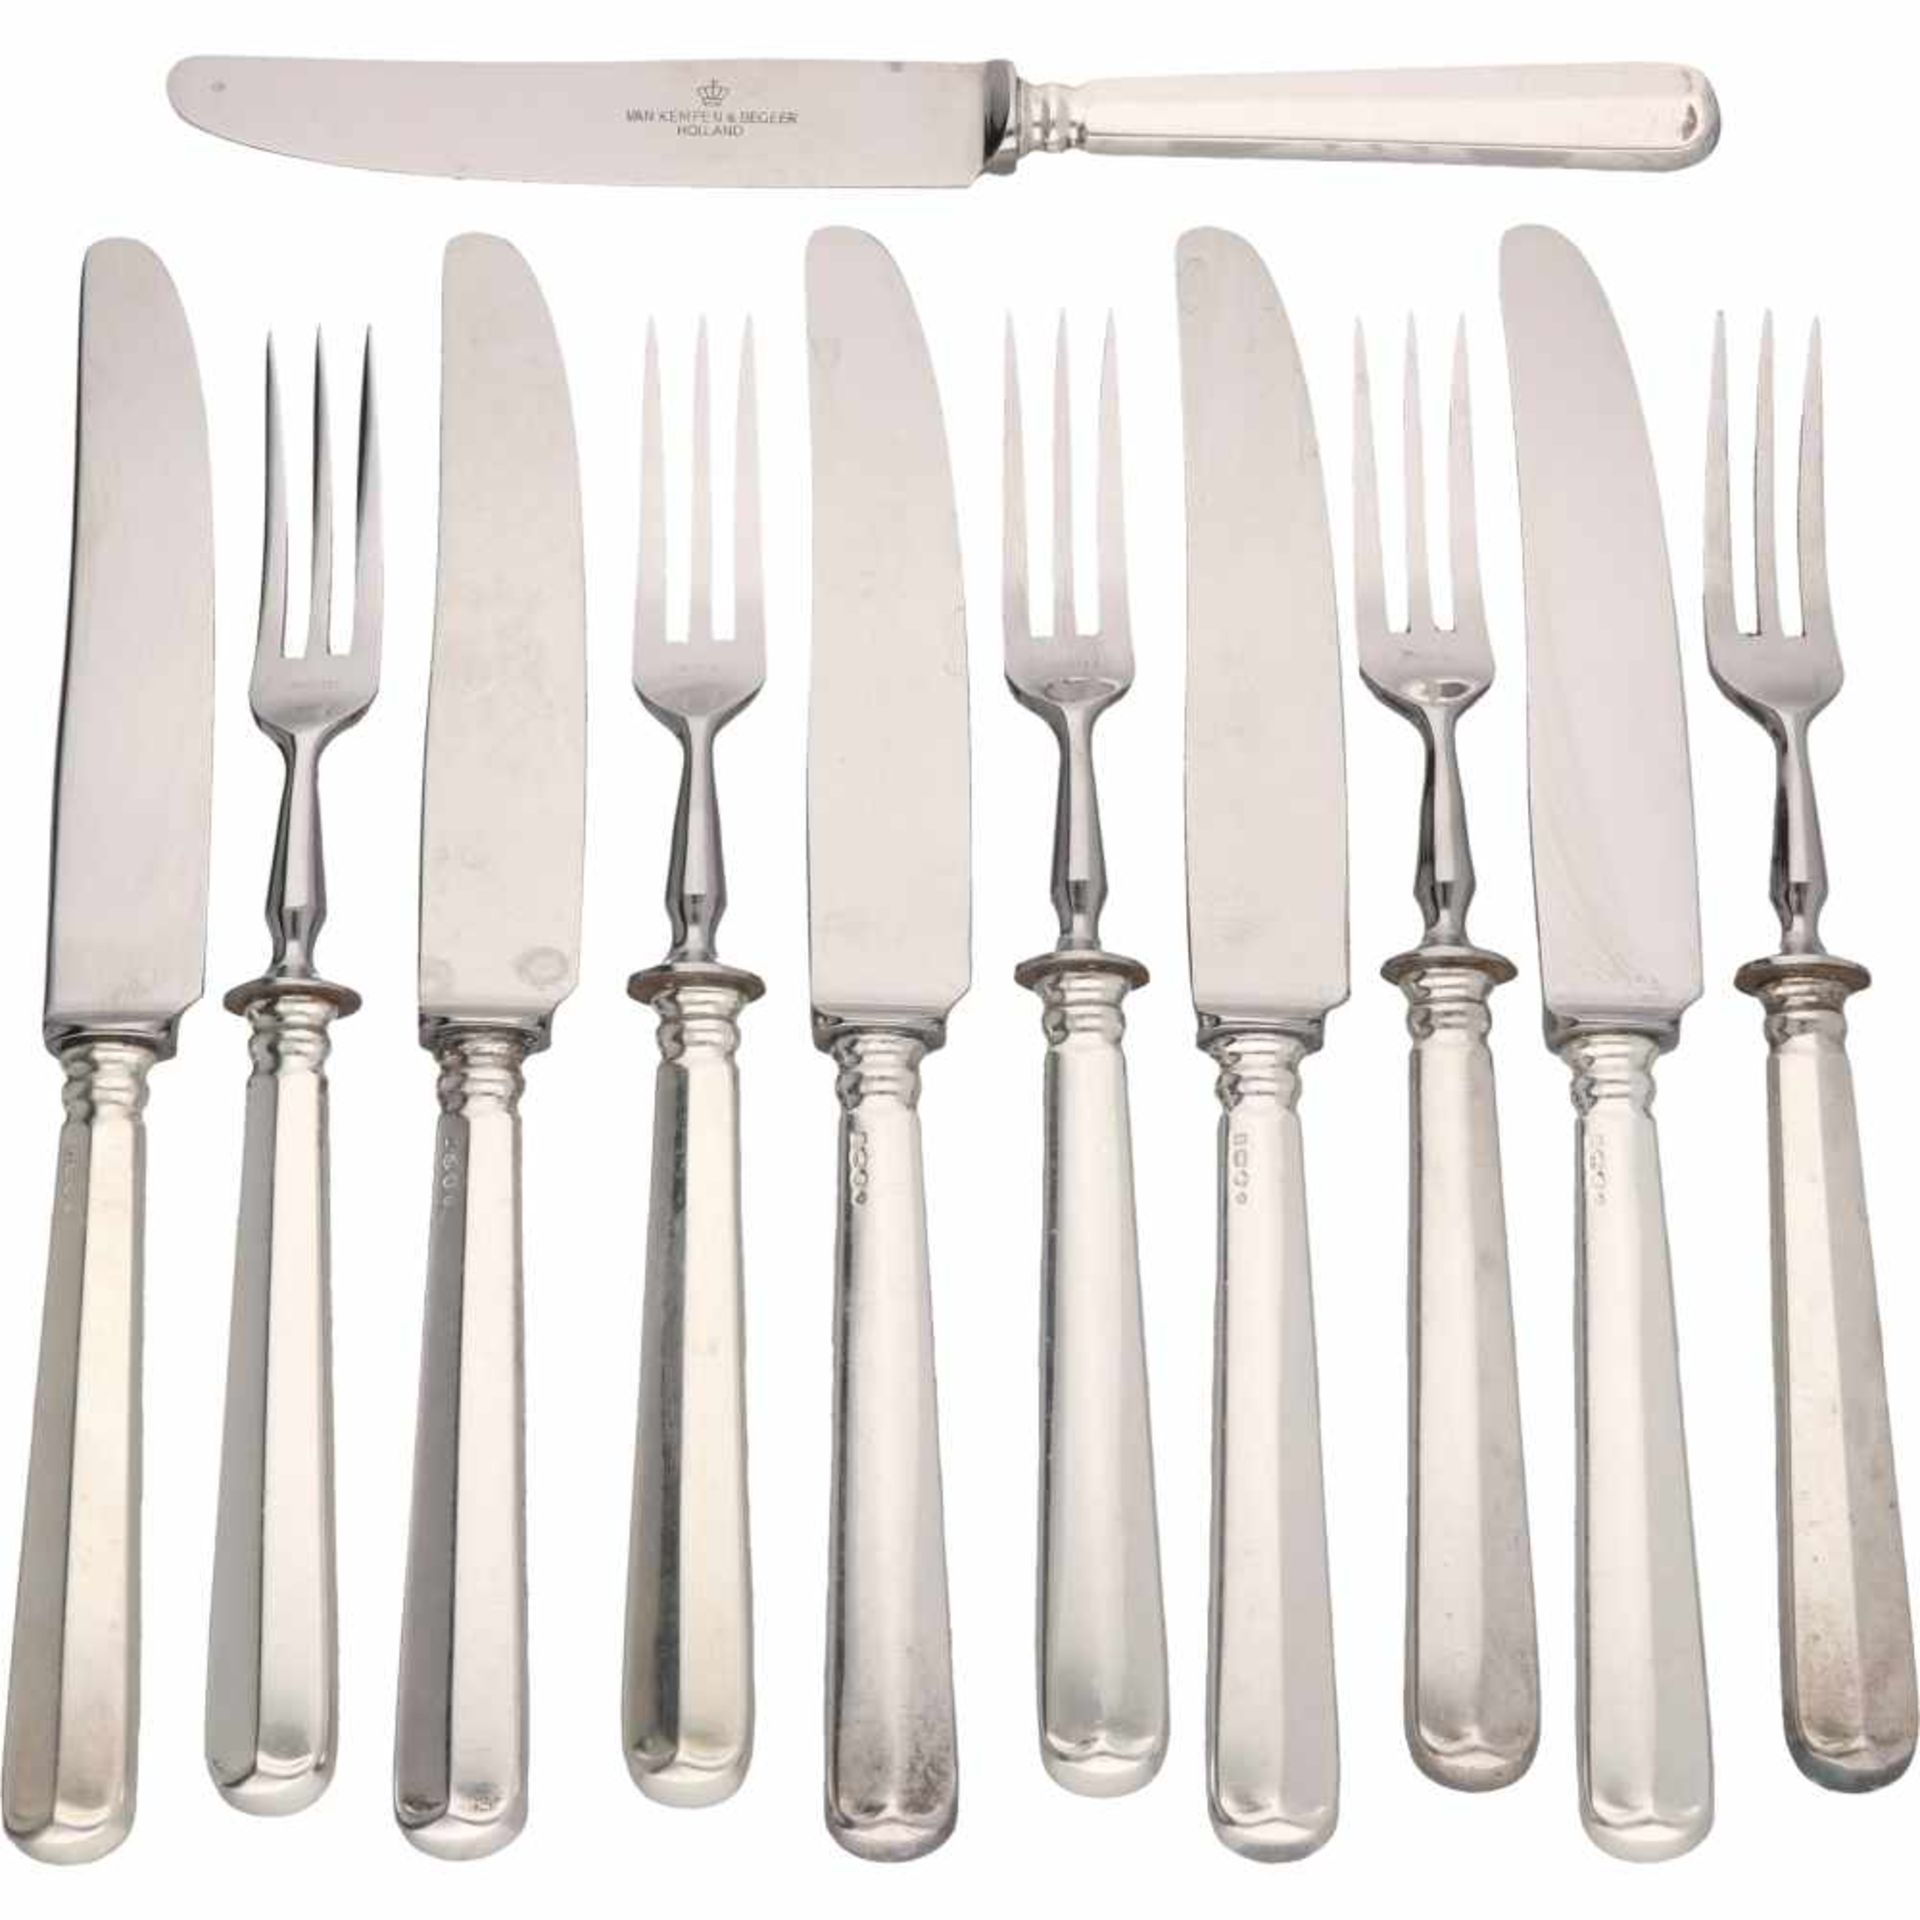 (11) Piece set of silver 'Haags Lofje' fruitknives and -forks.